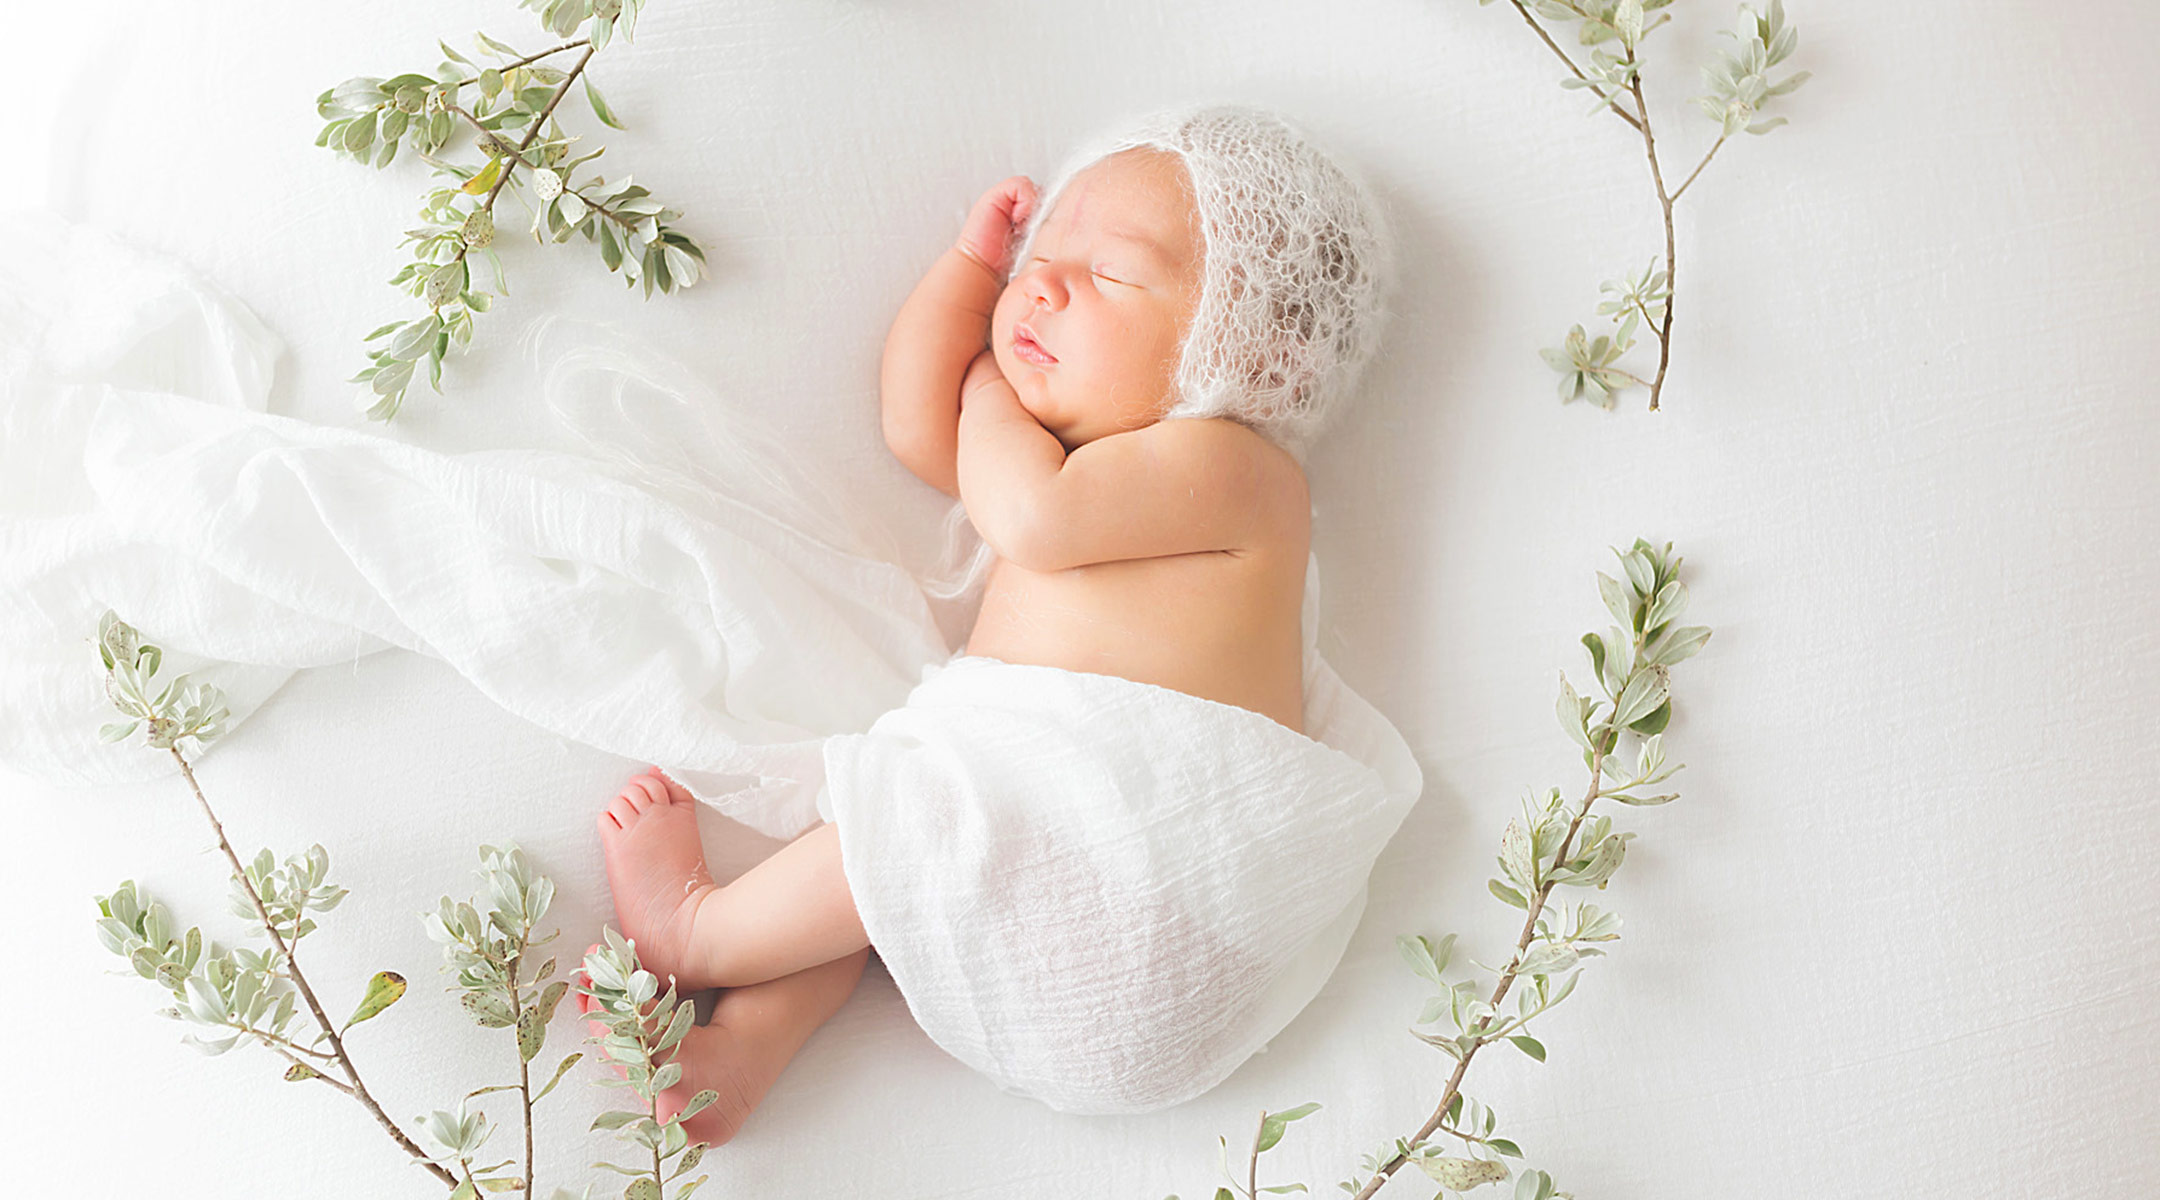 baby sleeping and wearing a white knit bonnet